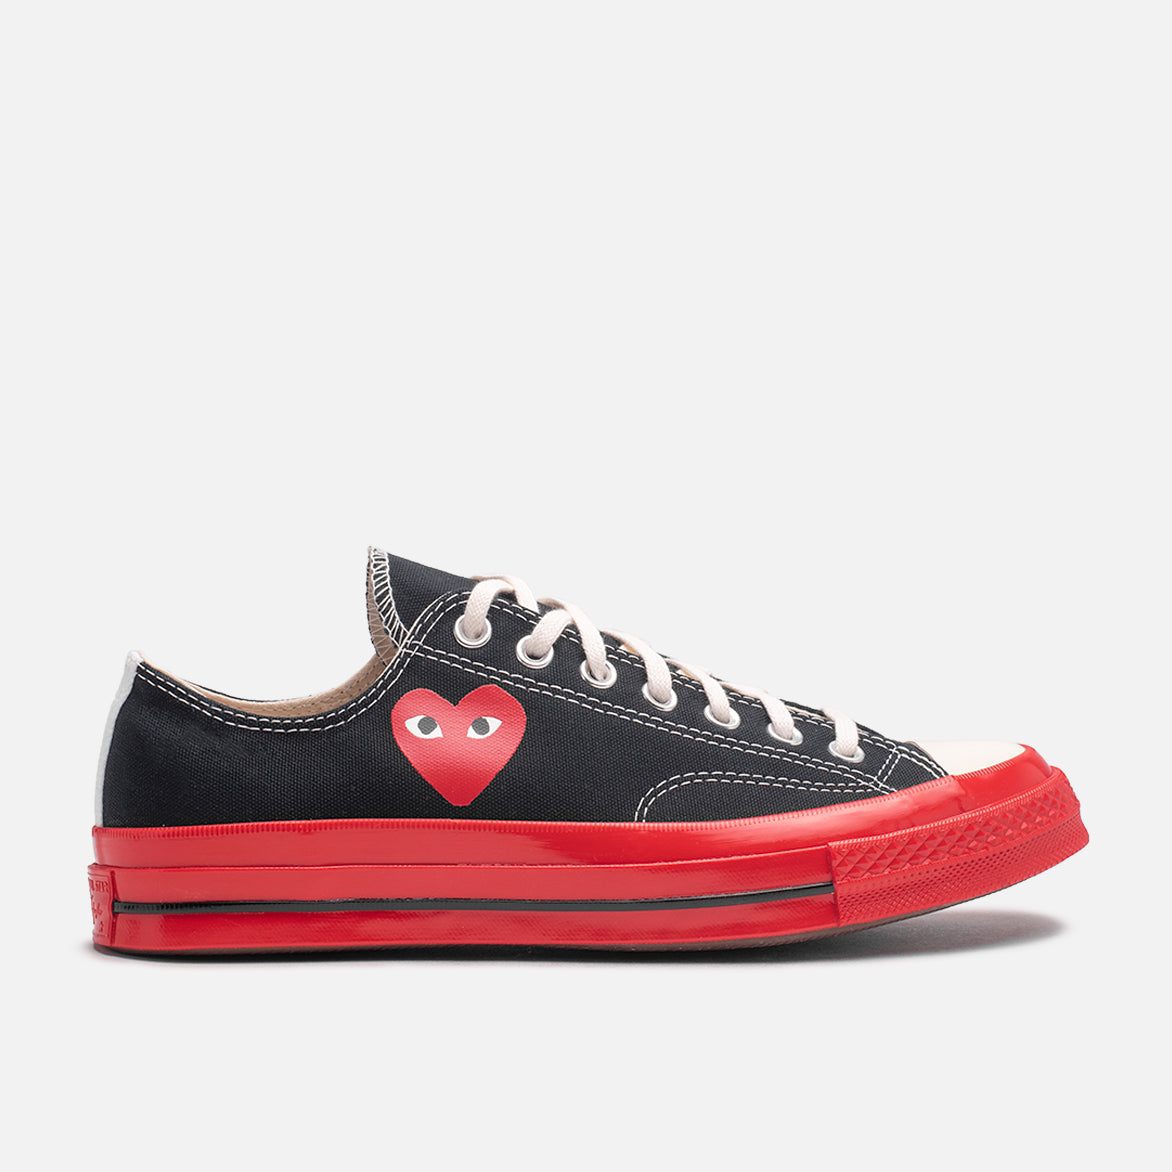 Forblive Forsømme TRUE CDG PLAY X CONVERSE CHUCK 70 OX - BLACK / RED | lapstoneandhammer.com